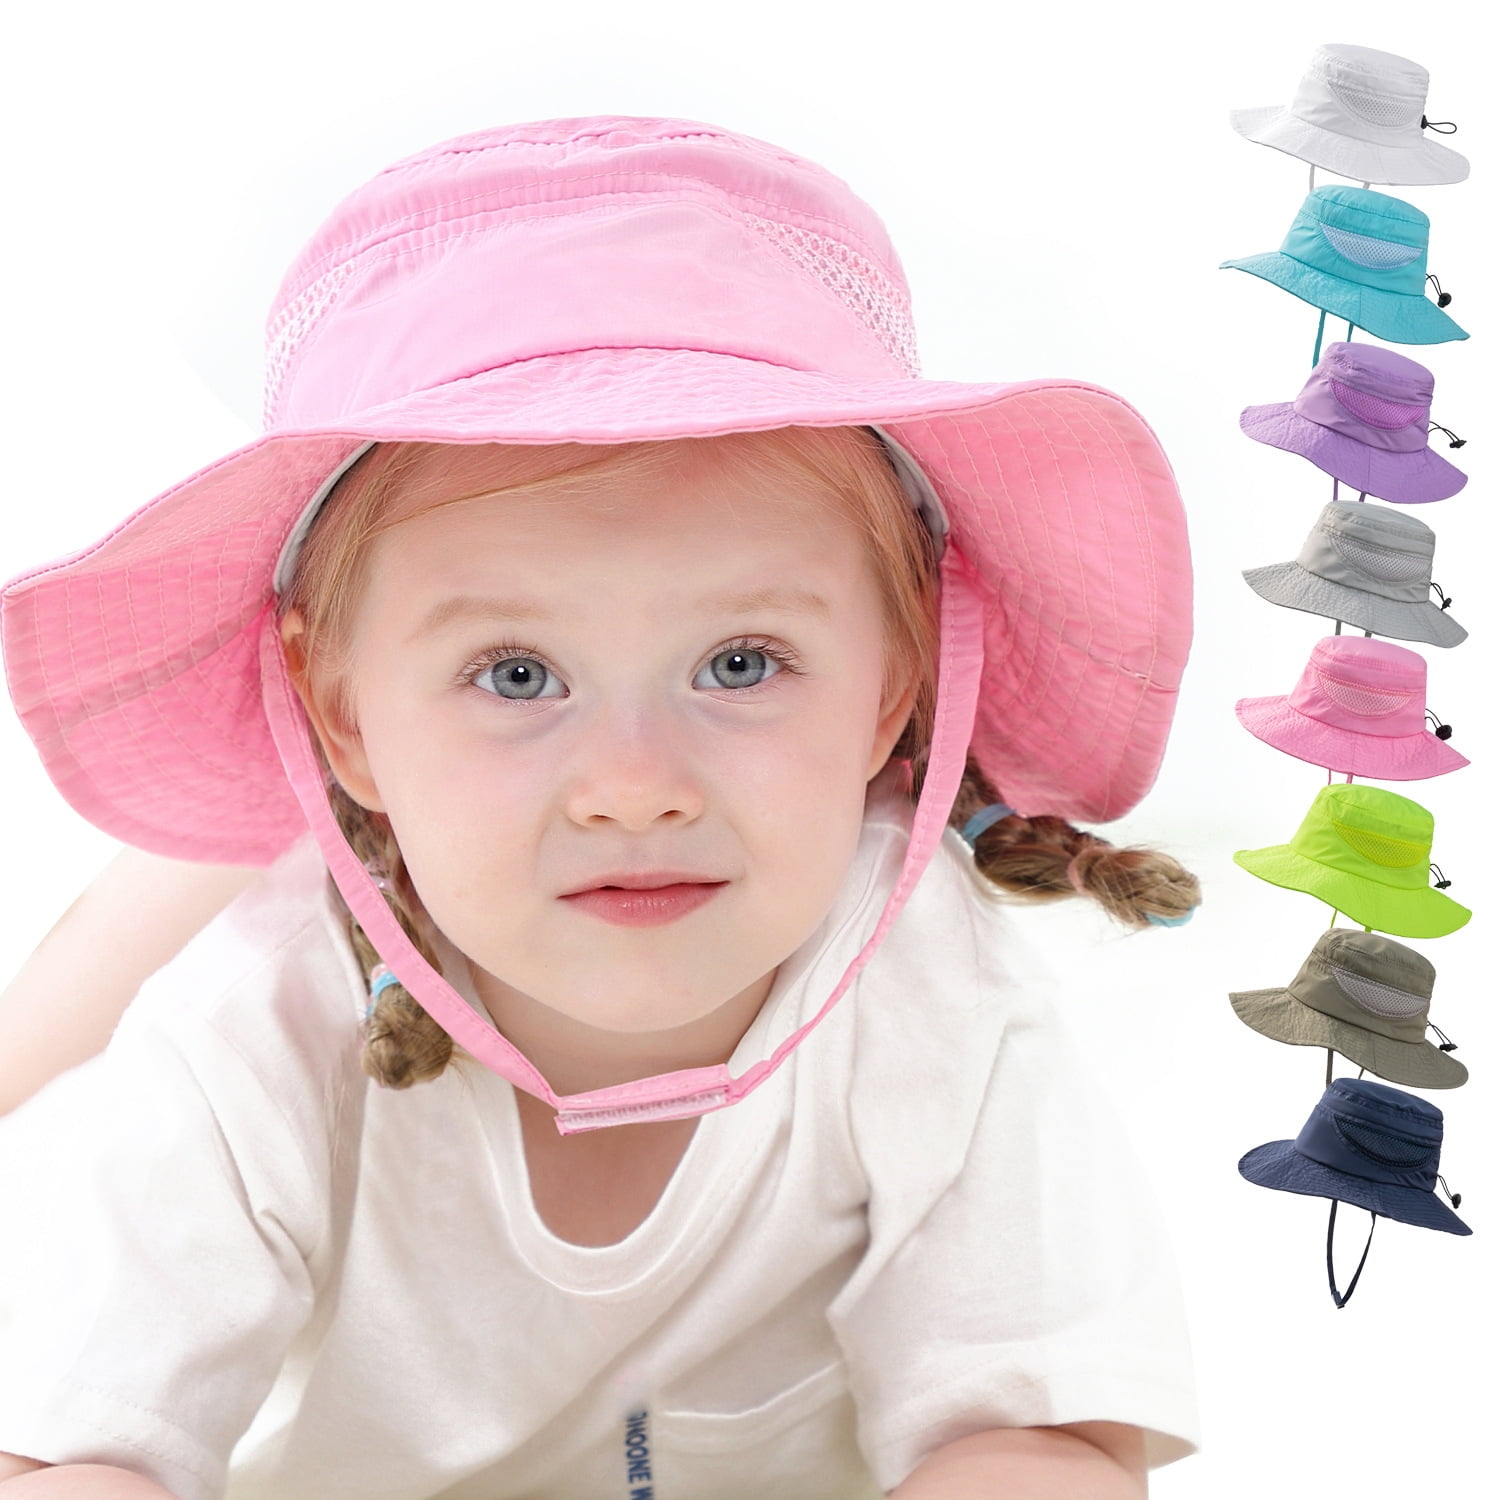 Husfou Kids Sun Hat, Summer Toddler Hats Breathable for Girls Boys Baby UPF  50+ Beach Hat Adjustable for 12 months-5 years Wide Brim Caps Sun  Protection Bucket Hat Children Hat 